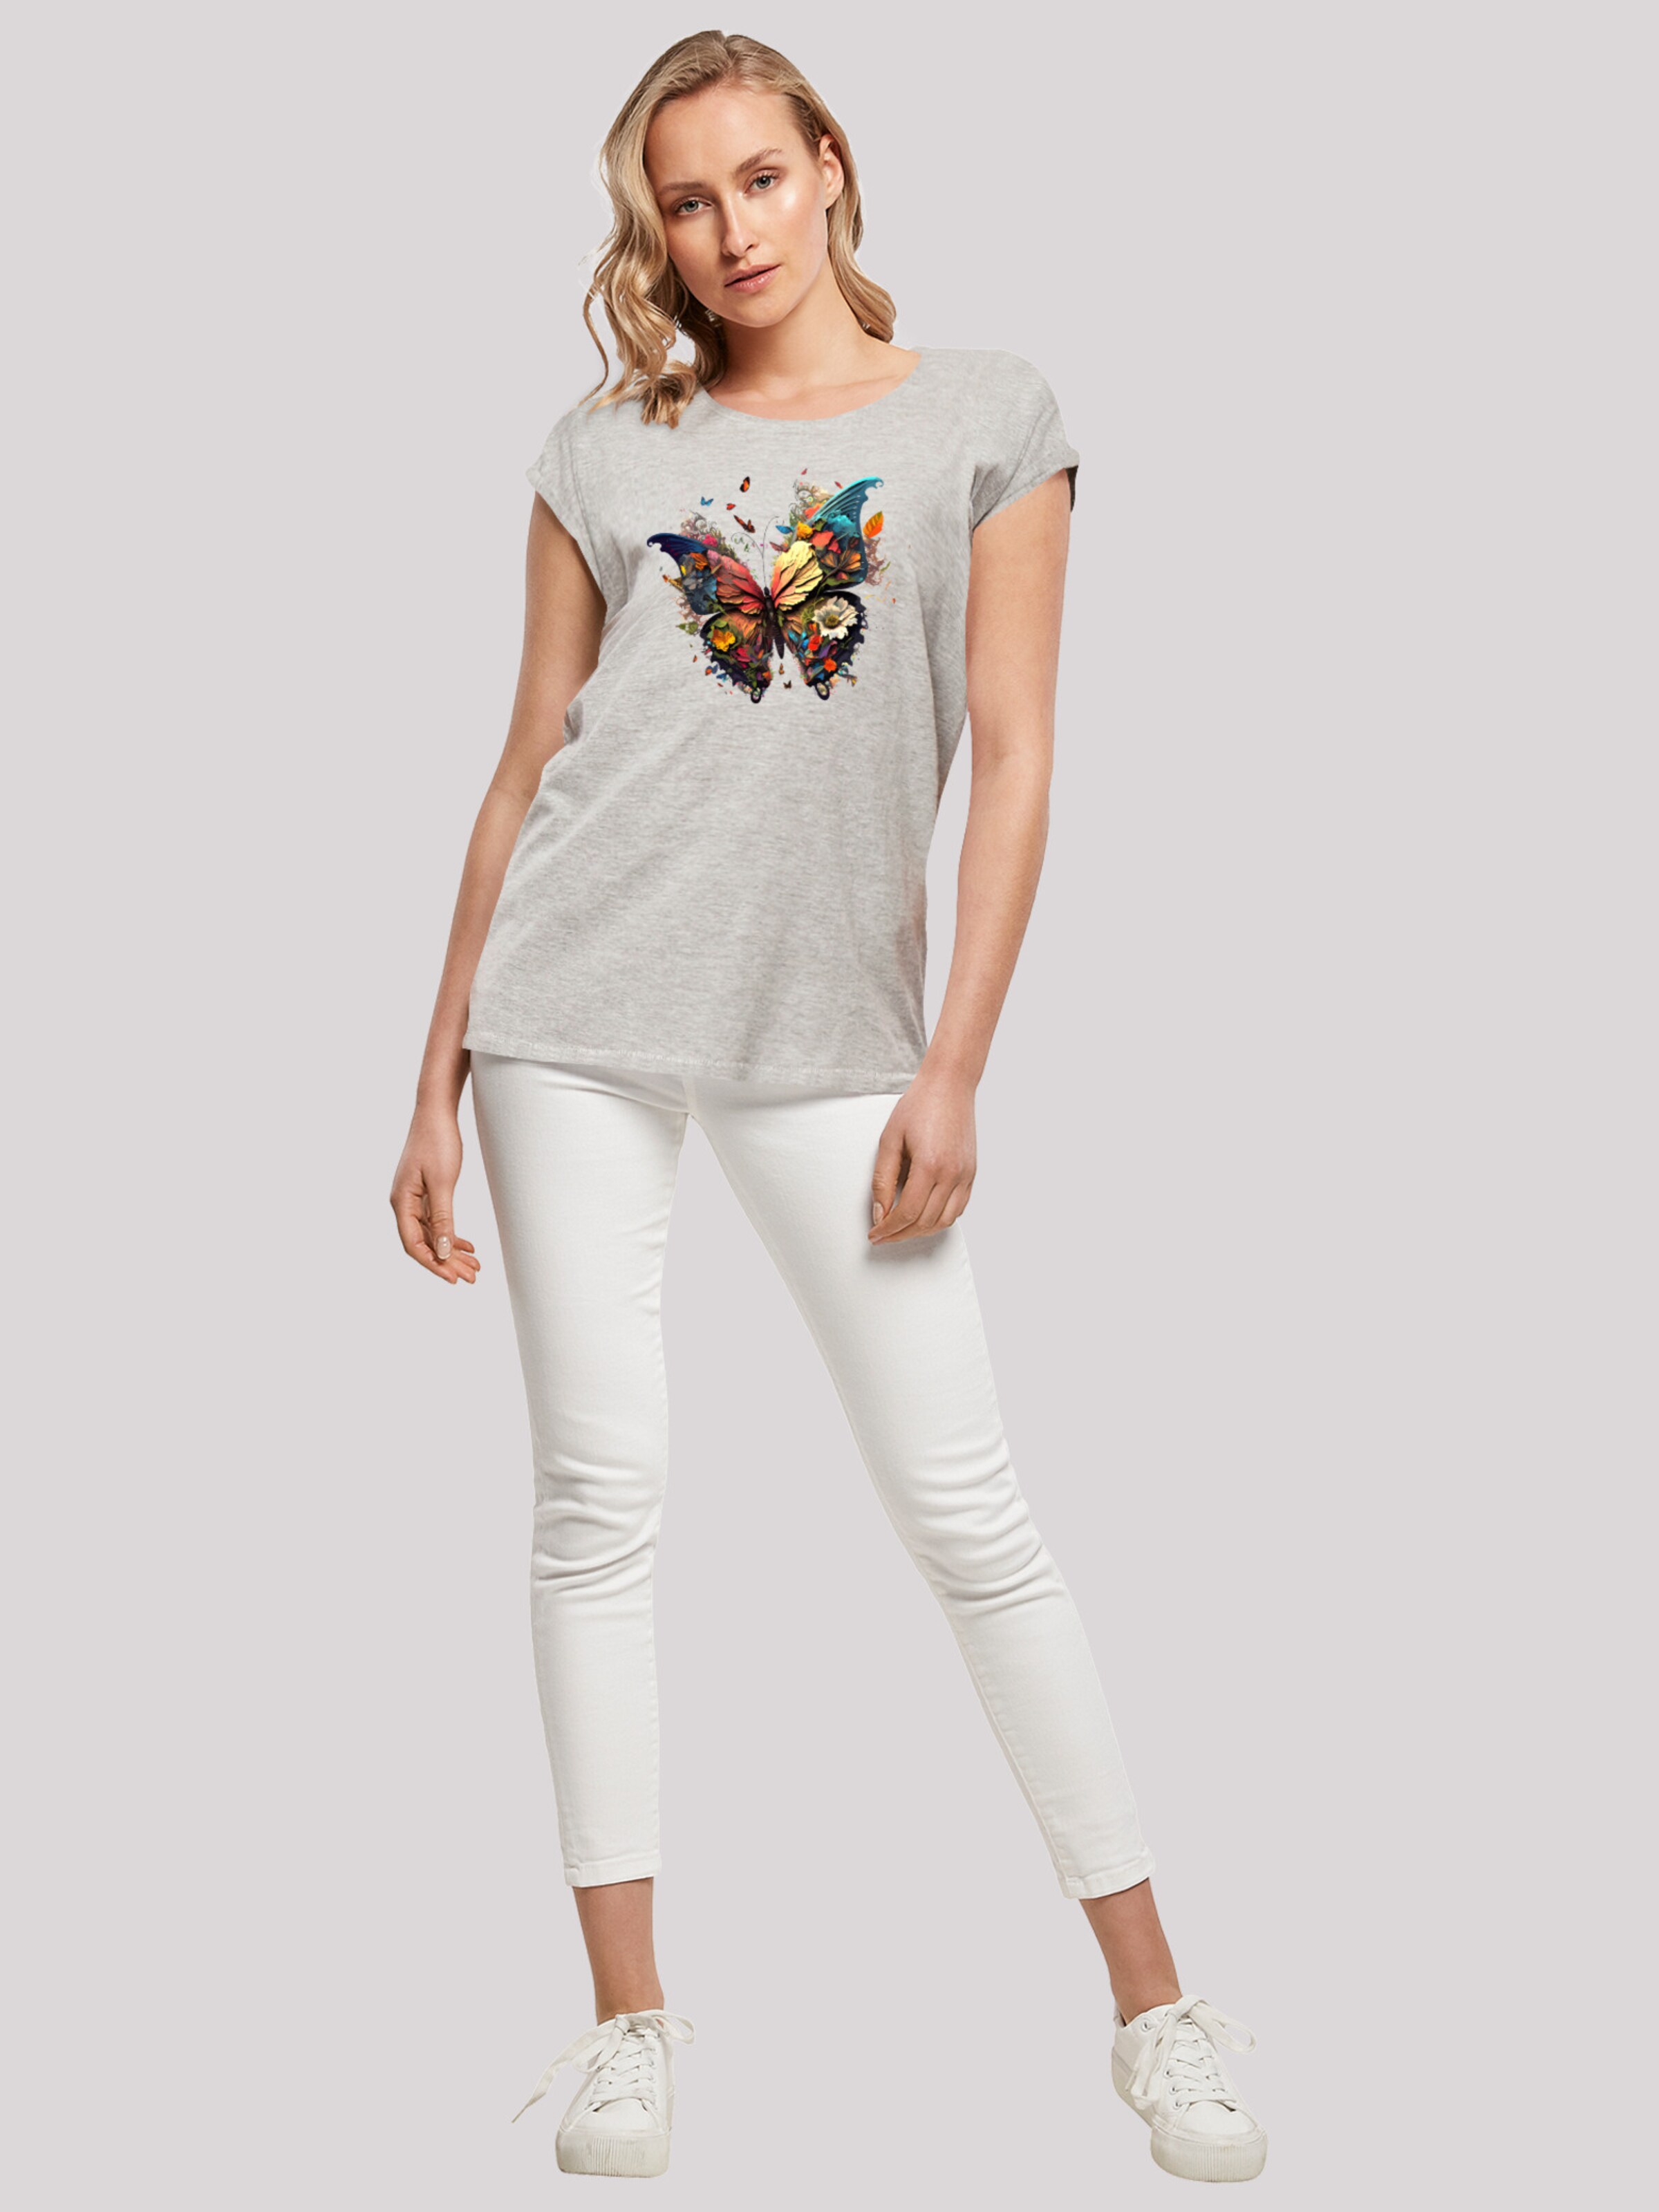 F4NT4STIC Shirt 'Schmetterling' in Grey | ABOUT YOU